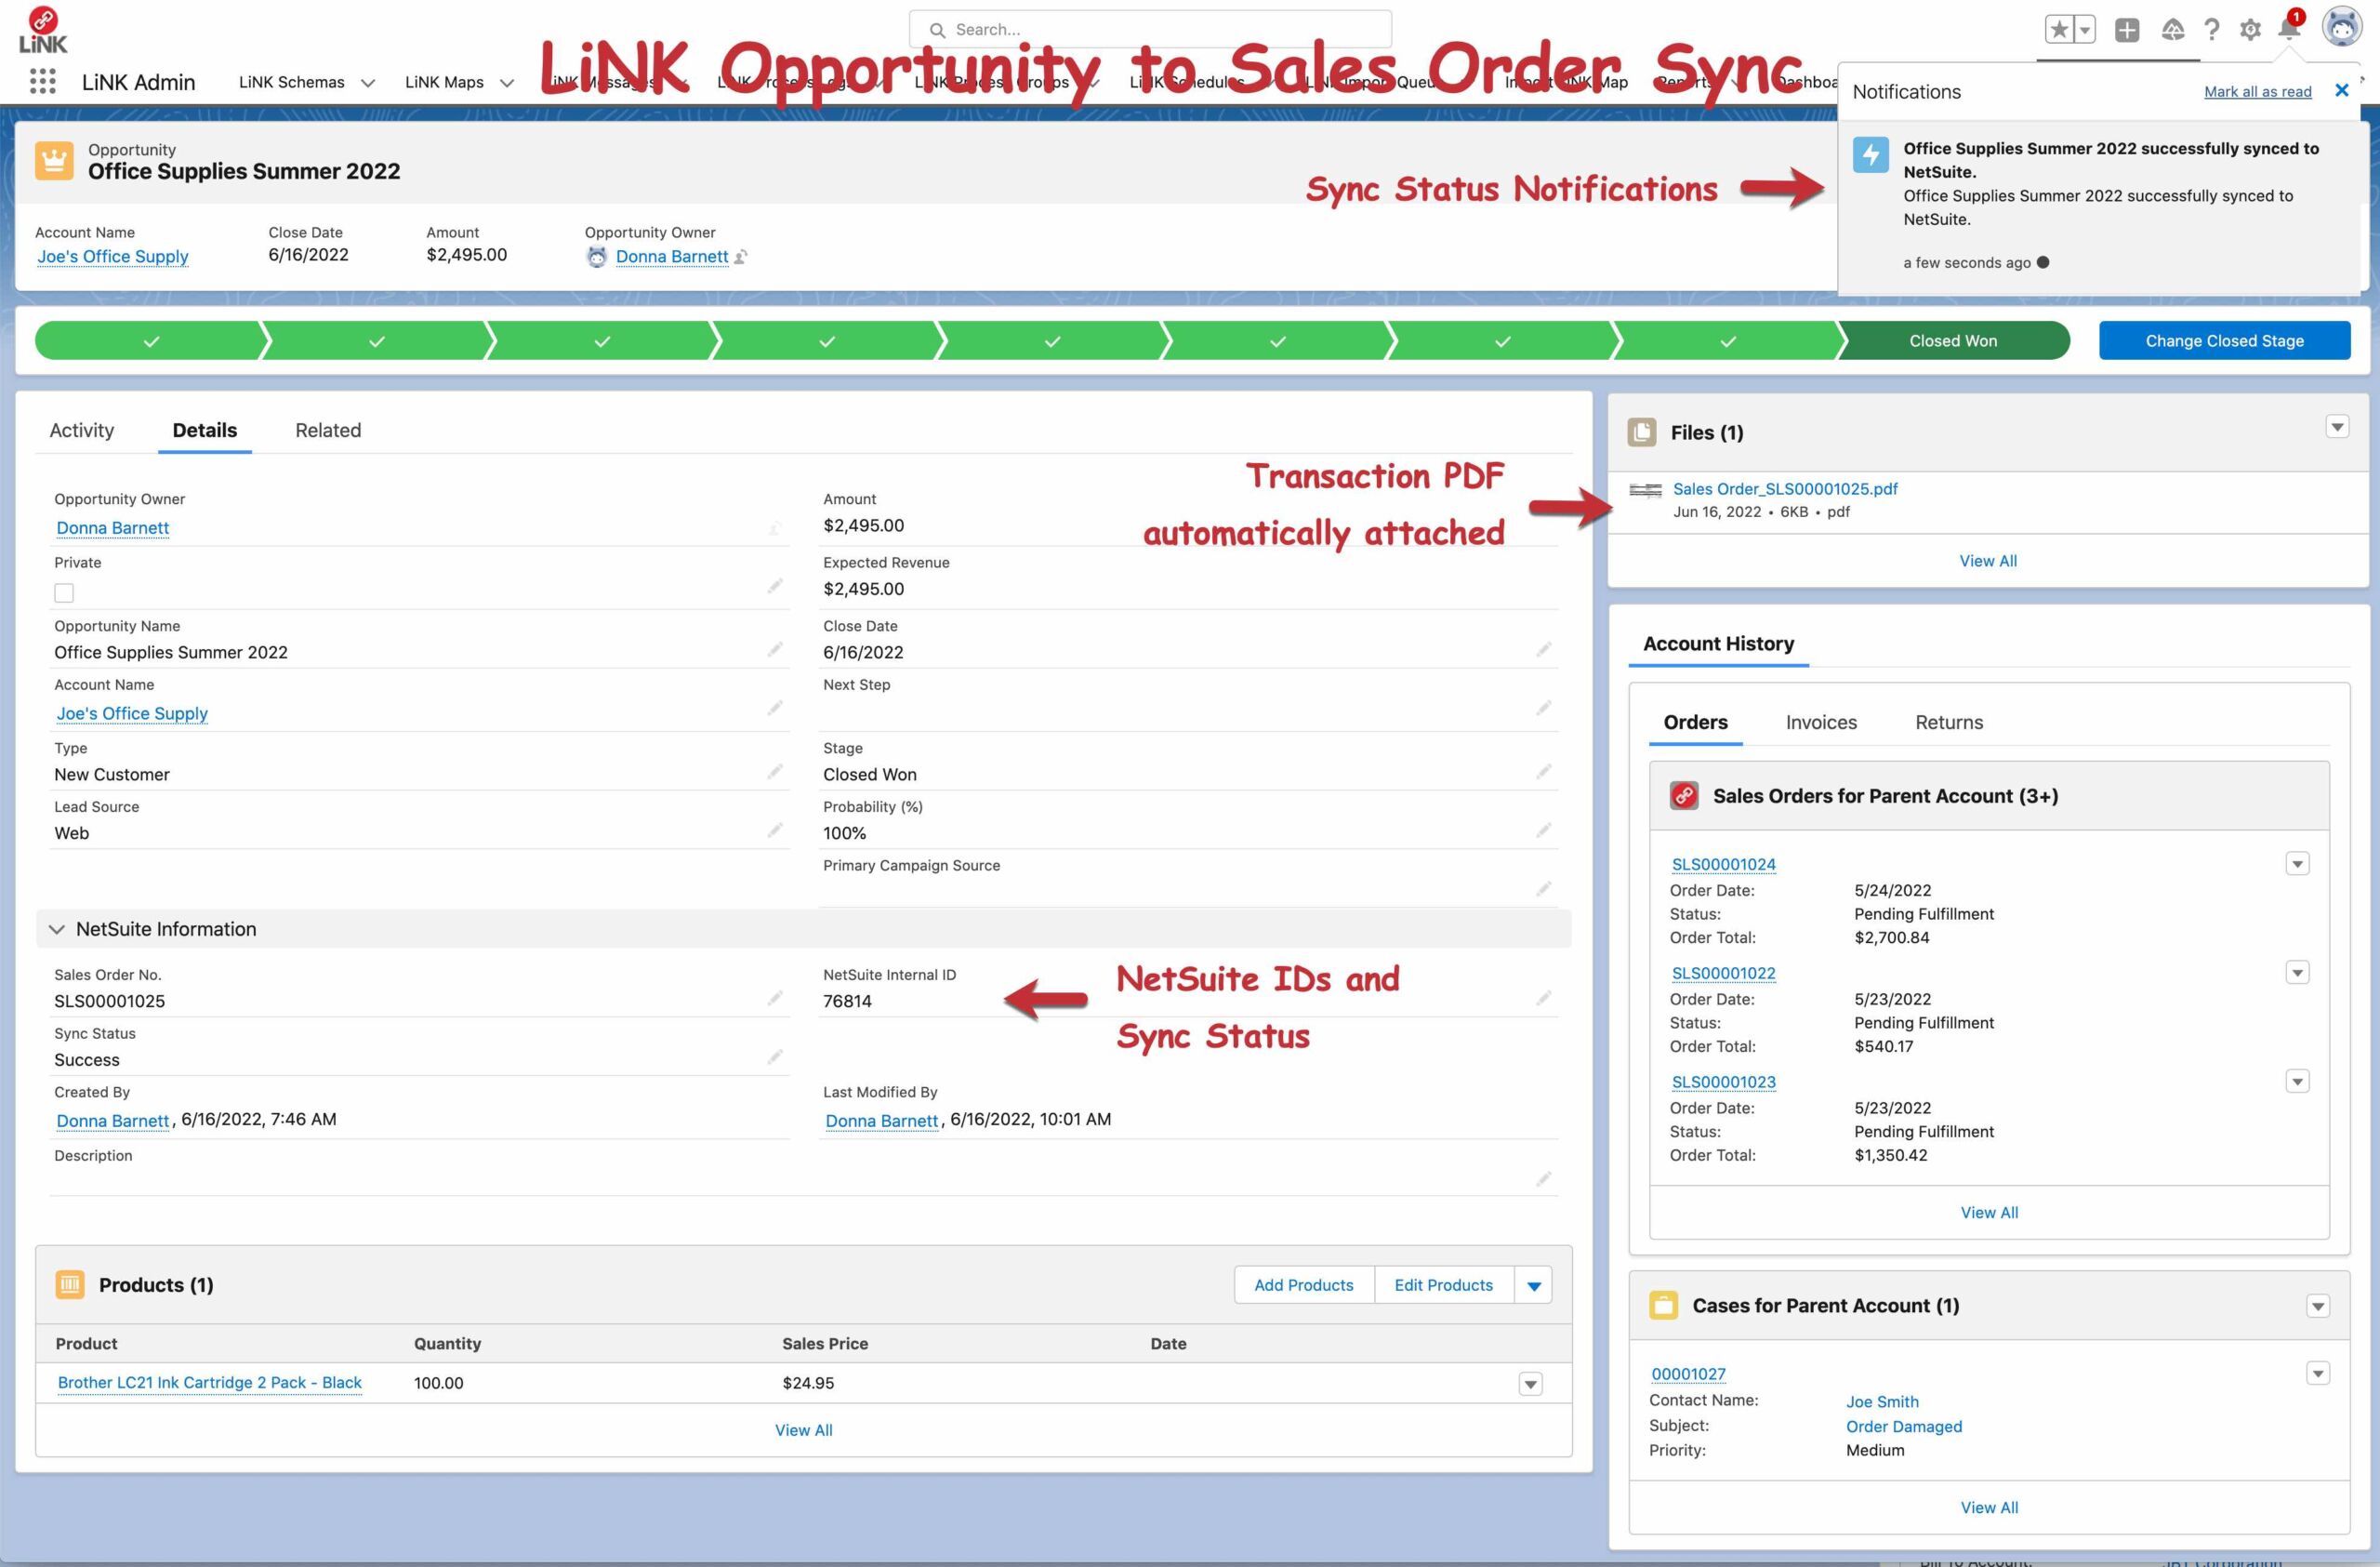 LiNK opportunity to get sales order sync through NetSuite